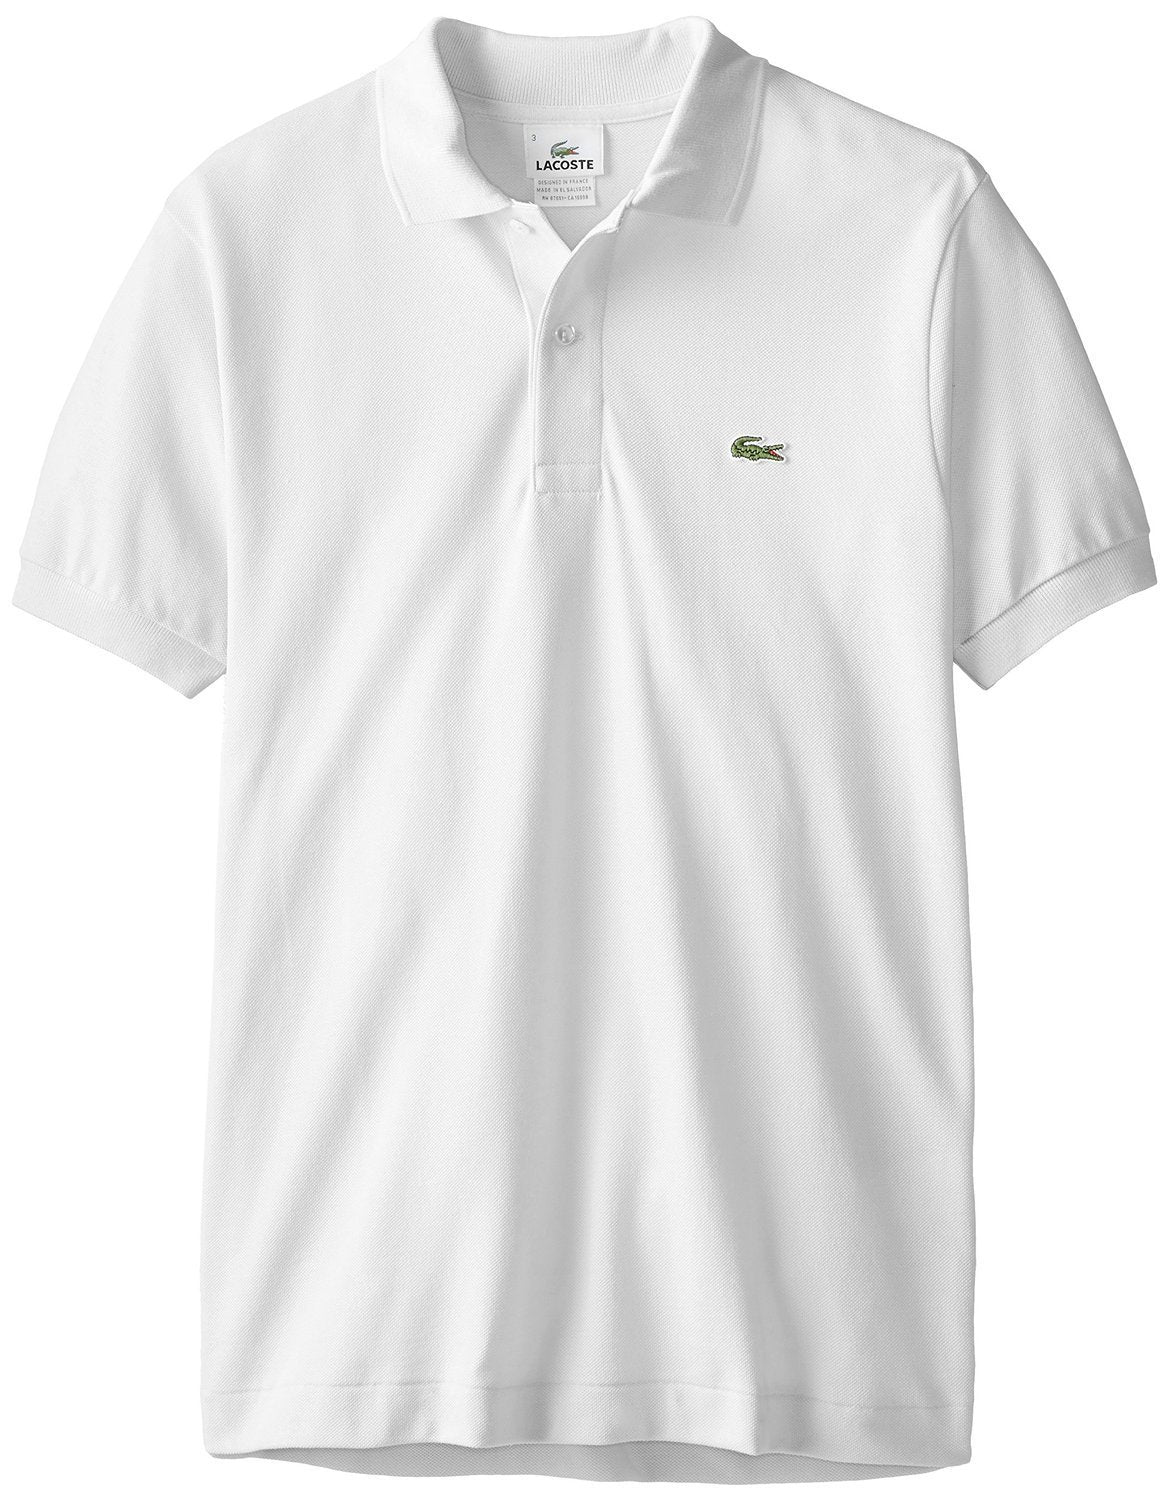 Lacoste x Peanuts Men's Blue Relaxed Fit Short Sleeve Polo Shirt